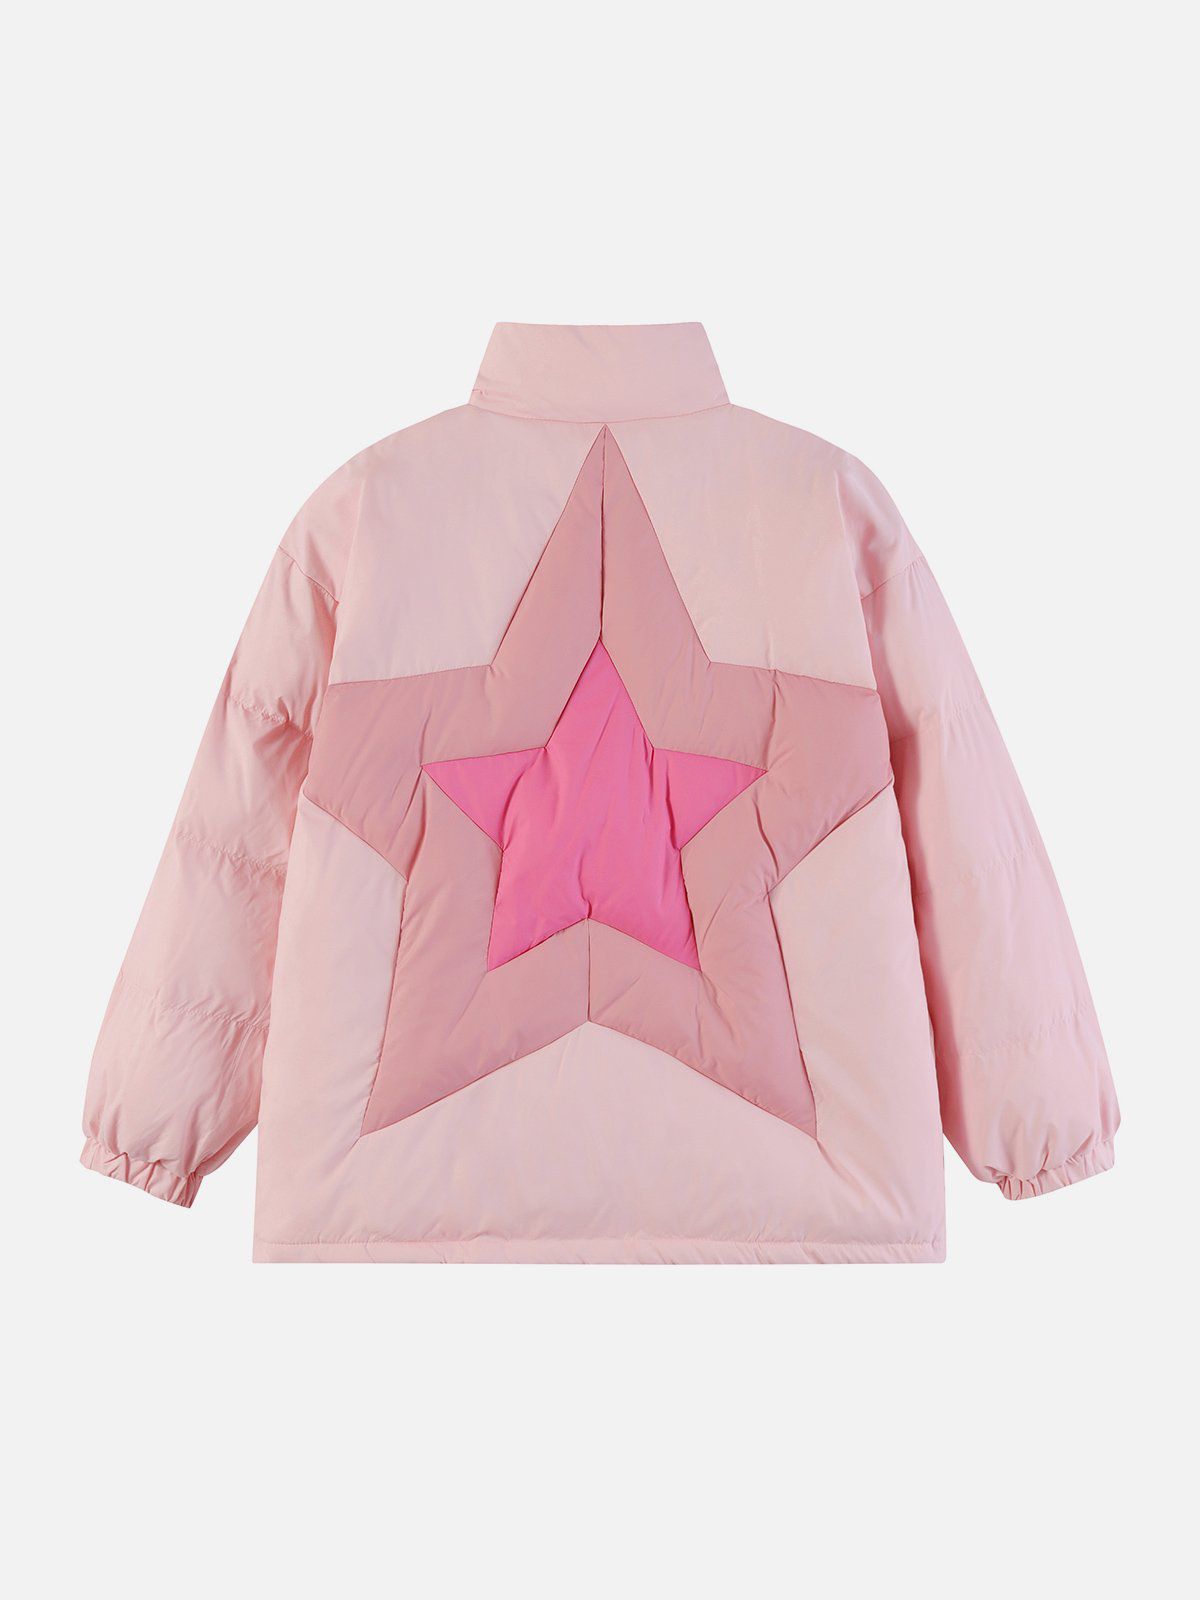 Majesda® - Star Patchwork Gradient Winter Coat outfit ideas streetwear fashion